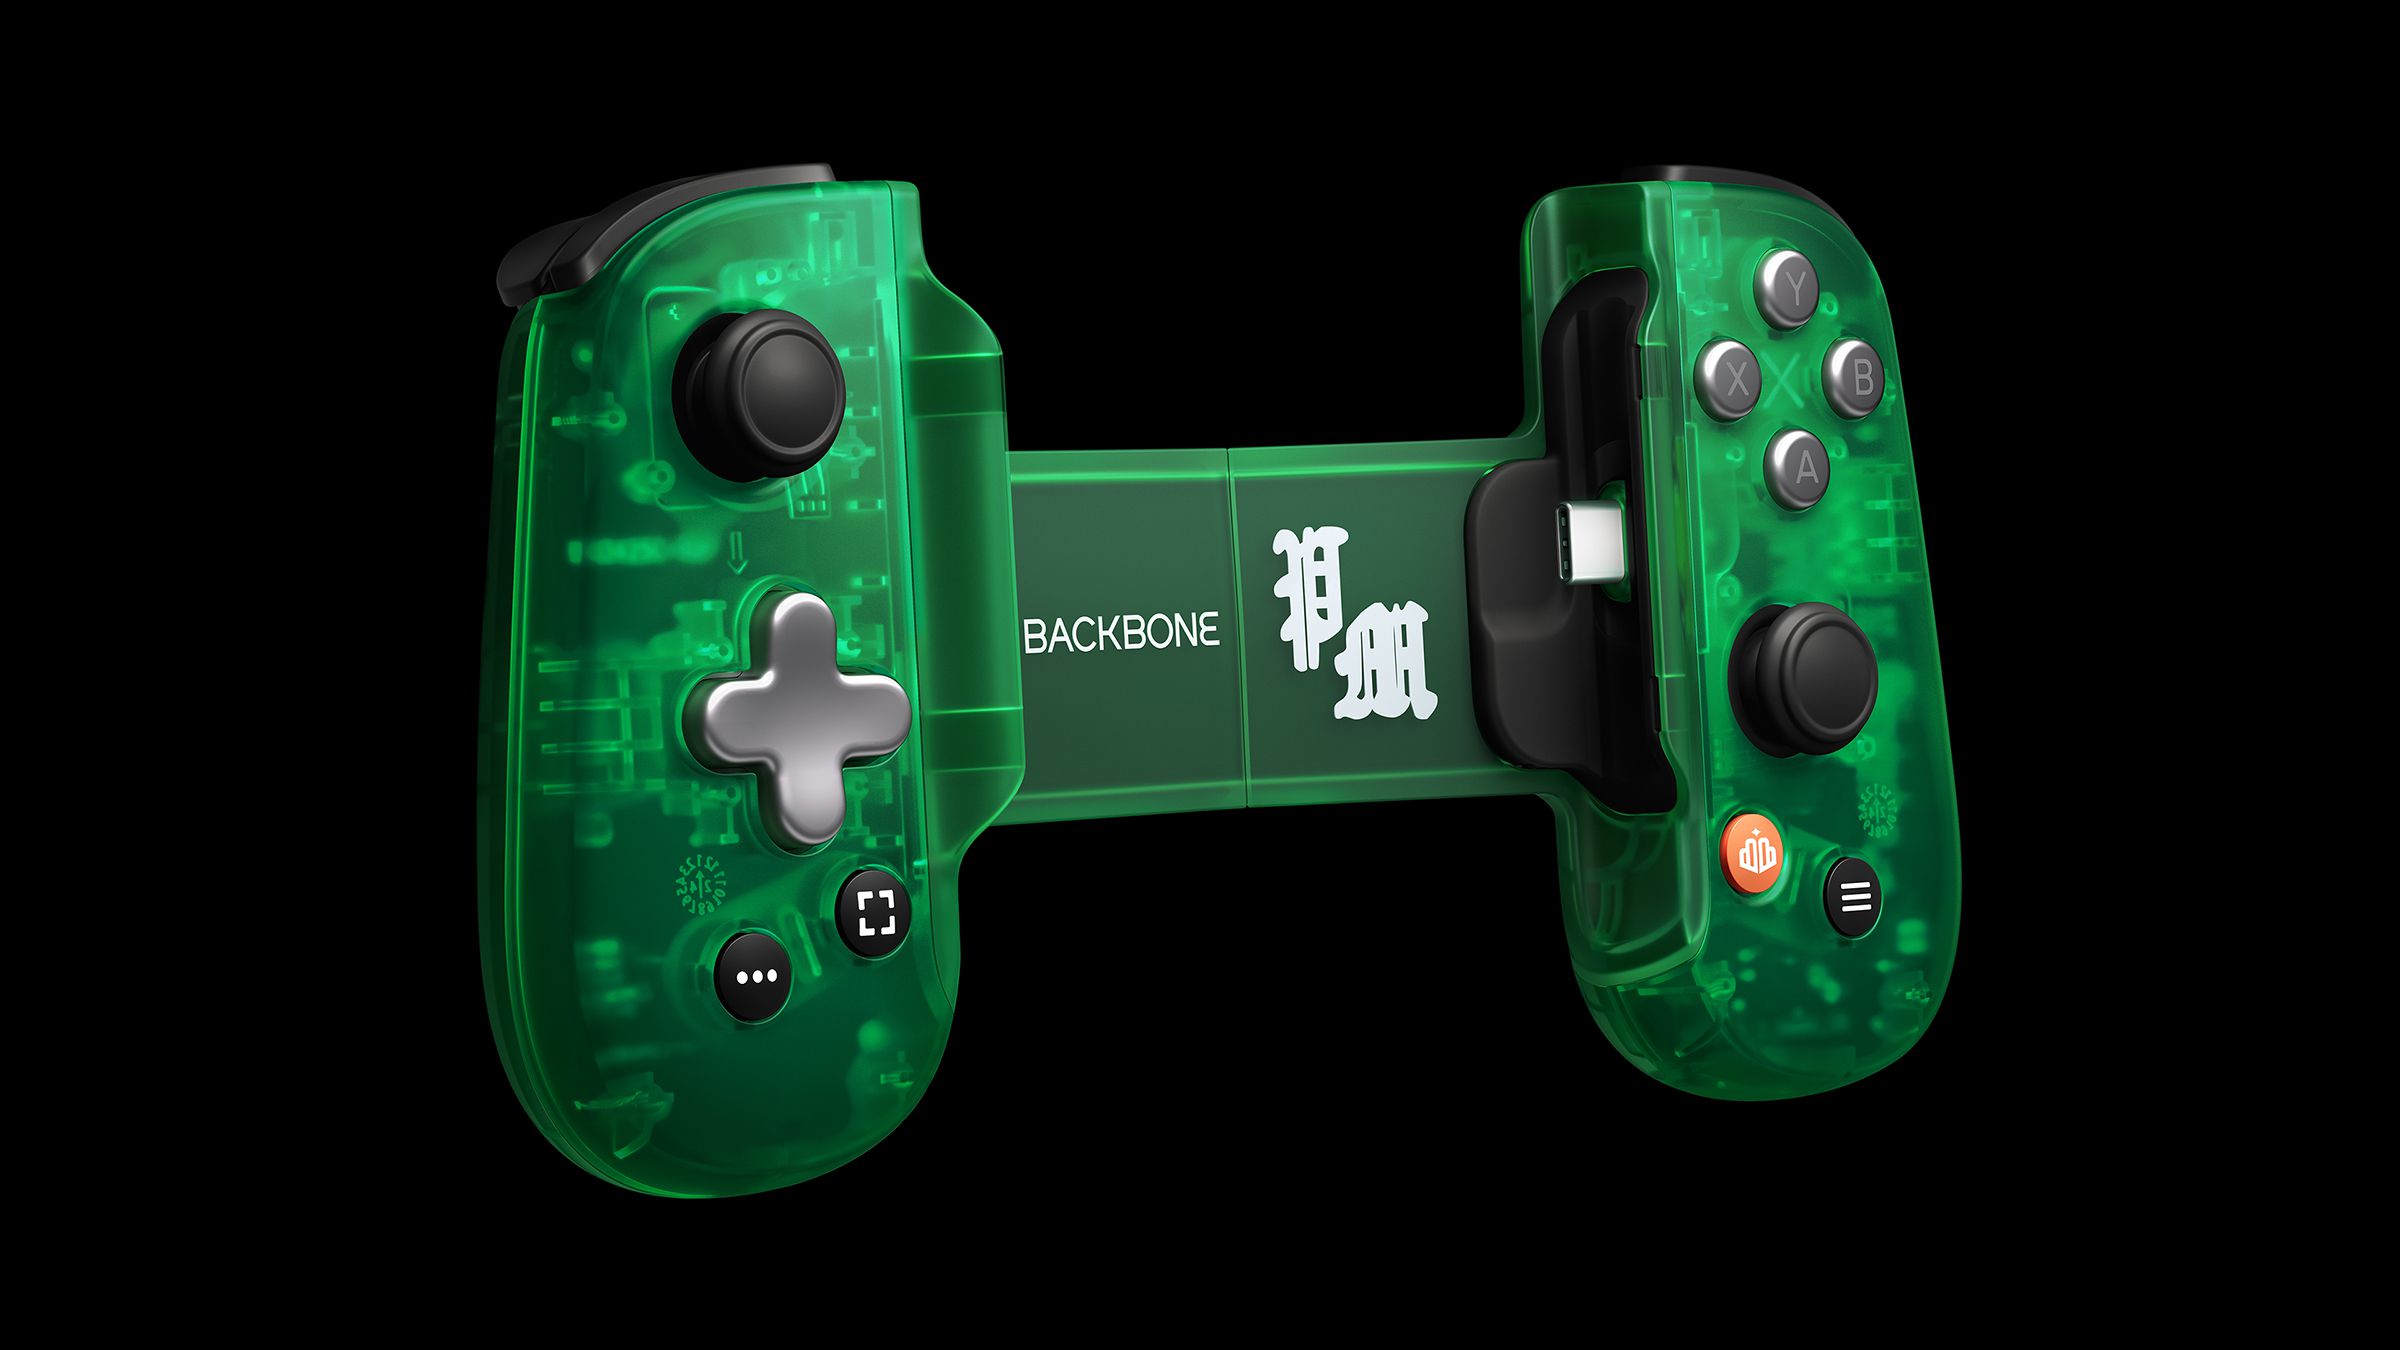 The Backbone&nbsp;One: Post Malone Limited Edition Controller without a smartphone attached.